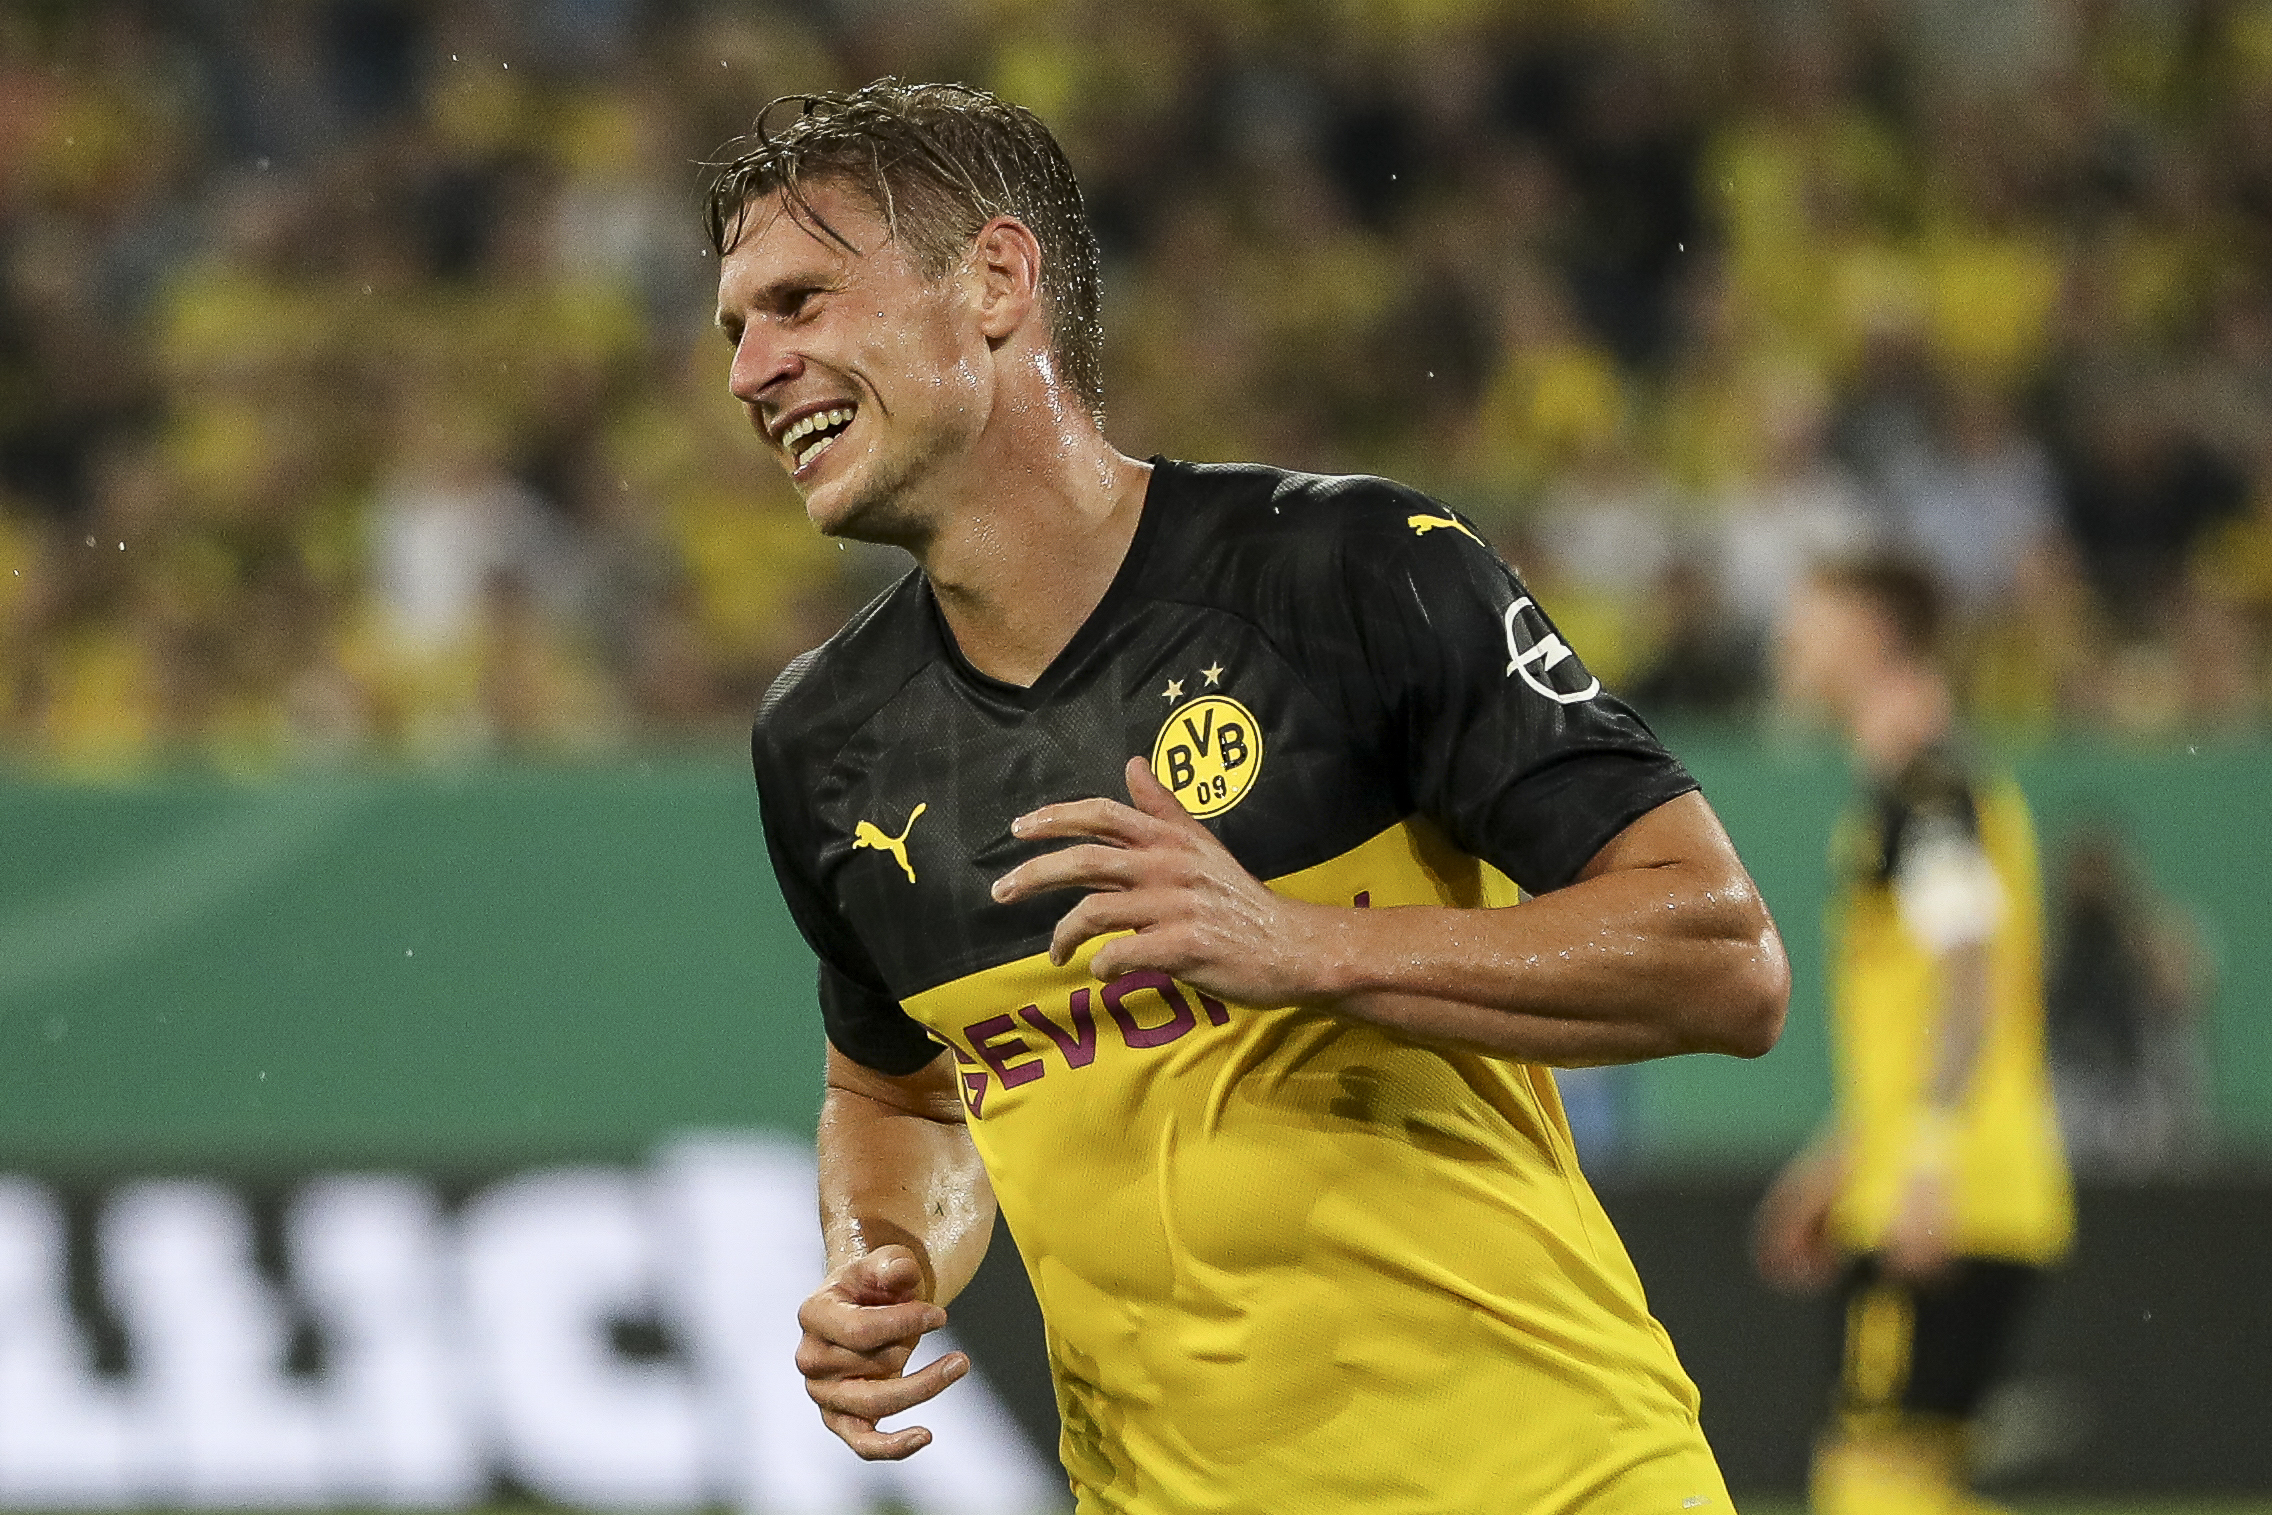 DUESSELDORF, GERMANY - AUGUST 09: Lukasz Piszczek of Borussia Dortmund reacts during the DFB Cup first round match between KFC Uerdingen and Borussia Dortmund at Merkur Spiel-Arena on August 09, 2019 in Duesseldorf, Germany. (Photo by Maja Hitij/Bongarts/Getty Images)